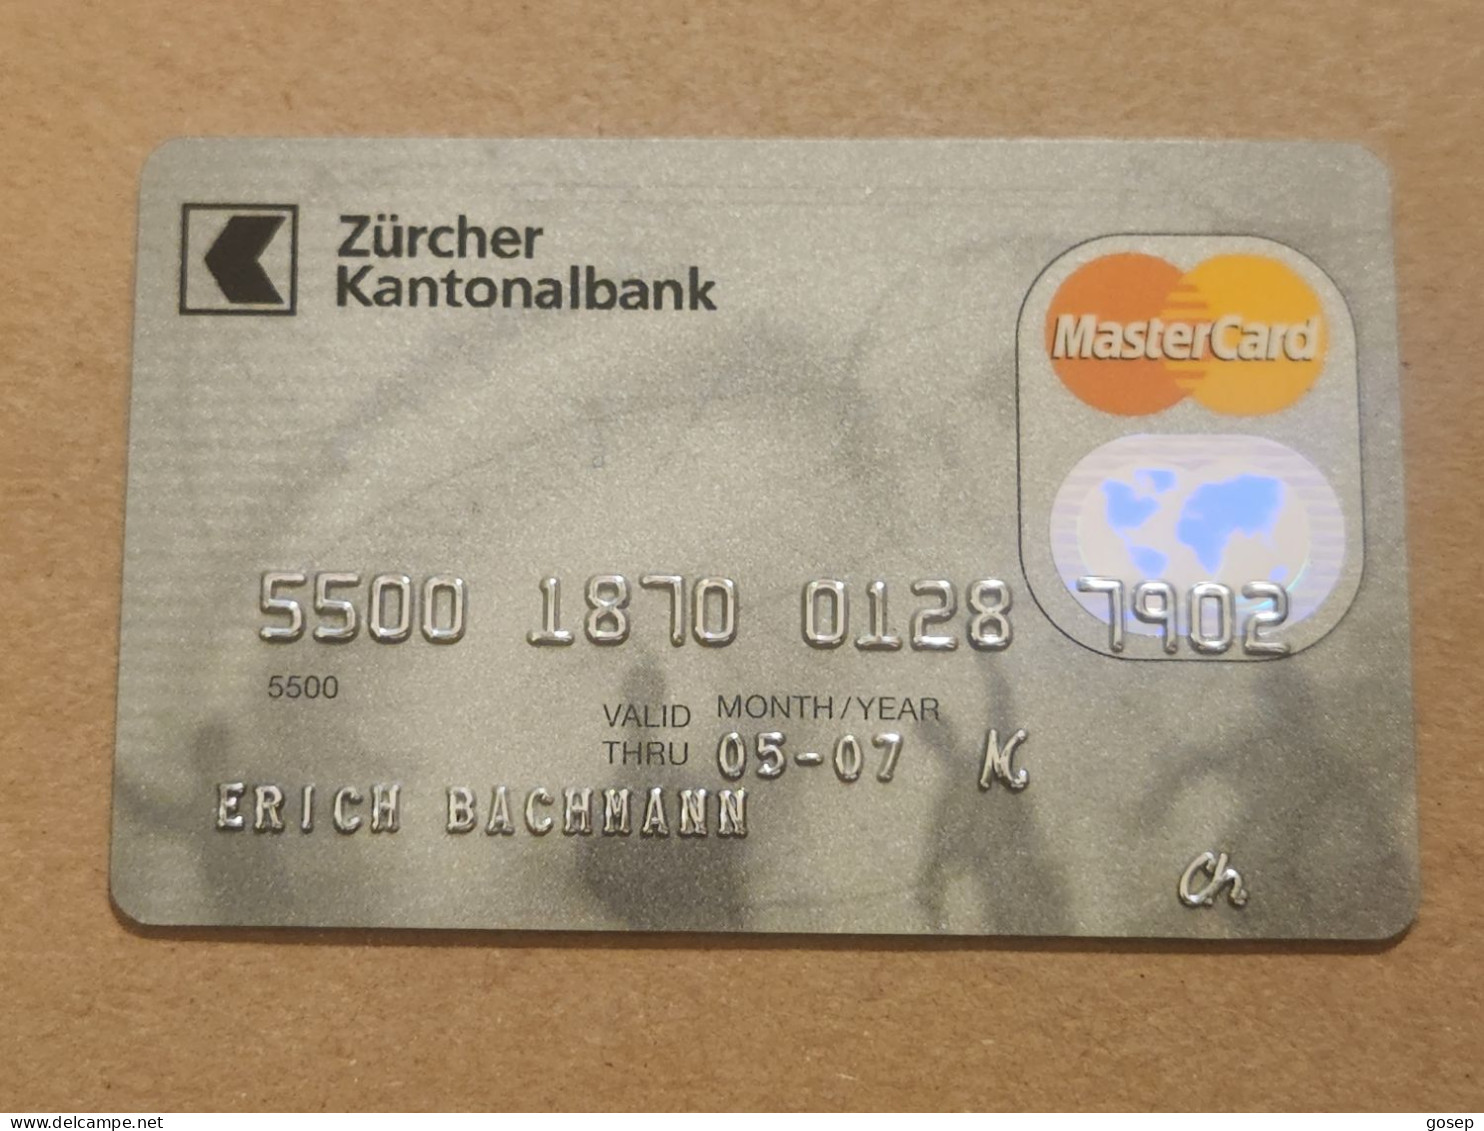 SWIZERLAND-CREDICT CARD- (ERICH BACHMANN)-(1234-6789)-(05/07)-(CREDICT MASTER CARD)-GOOD CARD - Credit Cards (Exp. Date Min. 10 Years)